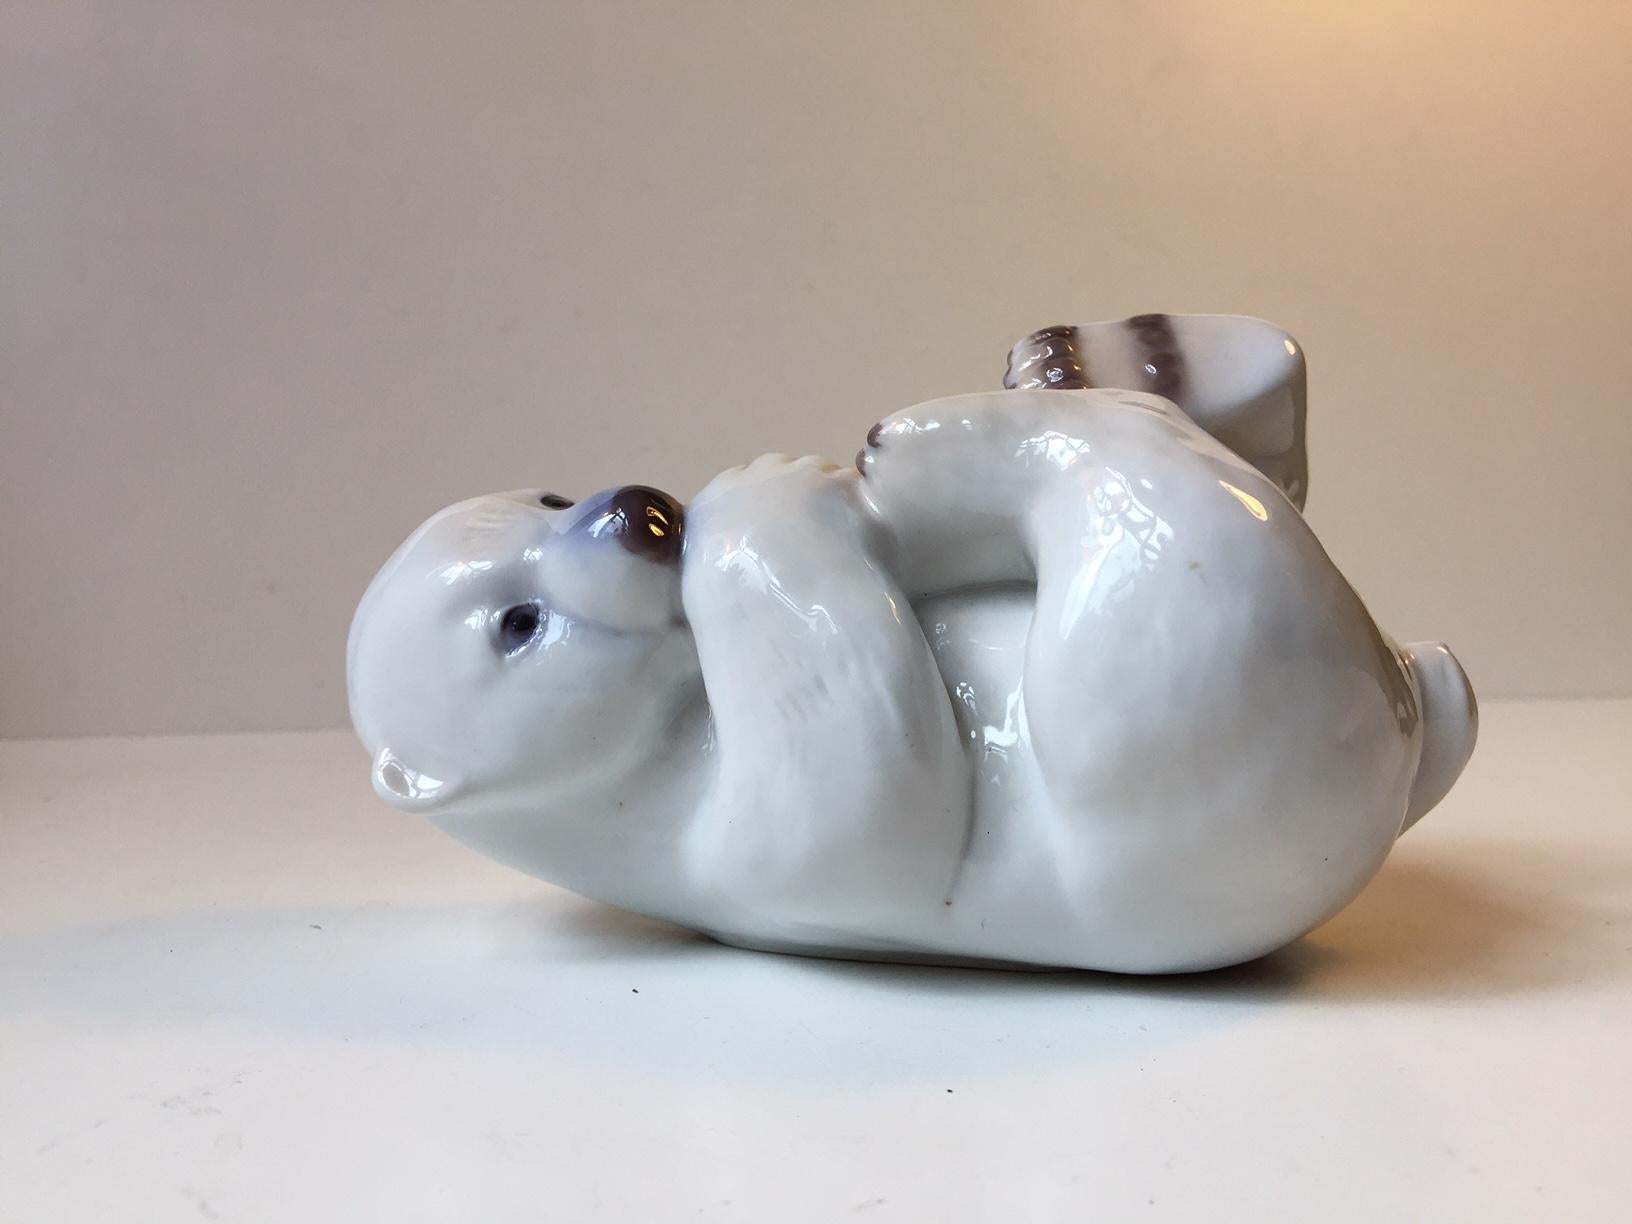 Hand decorated polar bear poppy in Porcelain. Designed by Merete Agergaard. Manufactured by B&G in Denmark during the 1970s. Design/model number: 2538. Meant to lie down on its back but can stand up as well. Fully marked and signed by the artist to